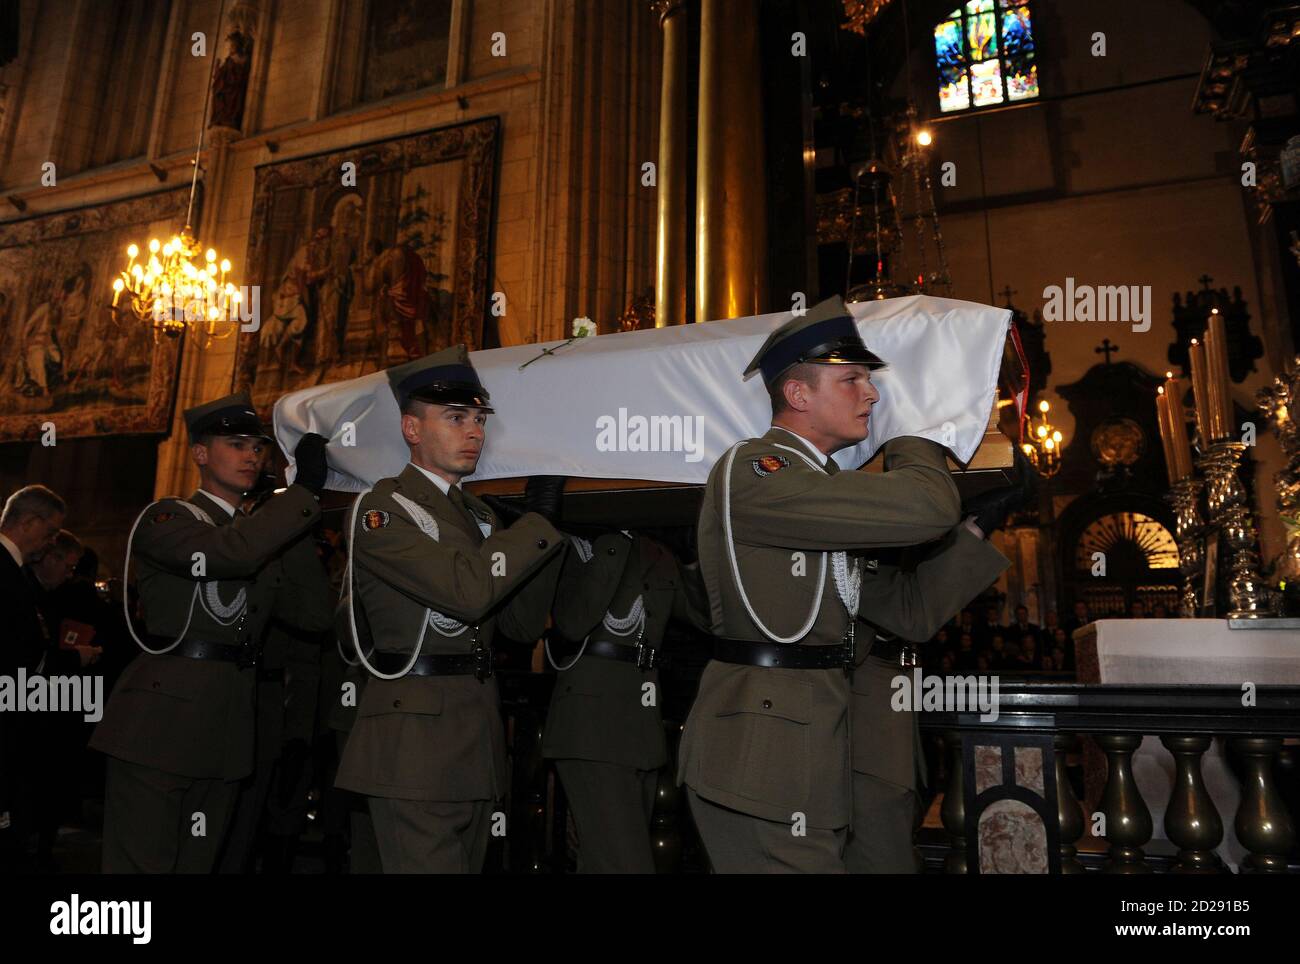 Polish soldiers carry the coffin holding the body of Polish first lady  Maria Kaczynska during a funeral procession in Wawel Cathedral in Krakow,  April 18, 2010. Polish and foreign leaders attended a